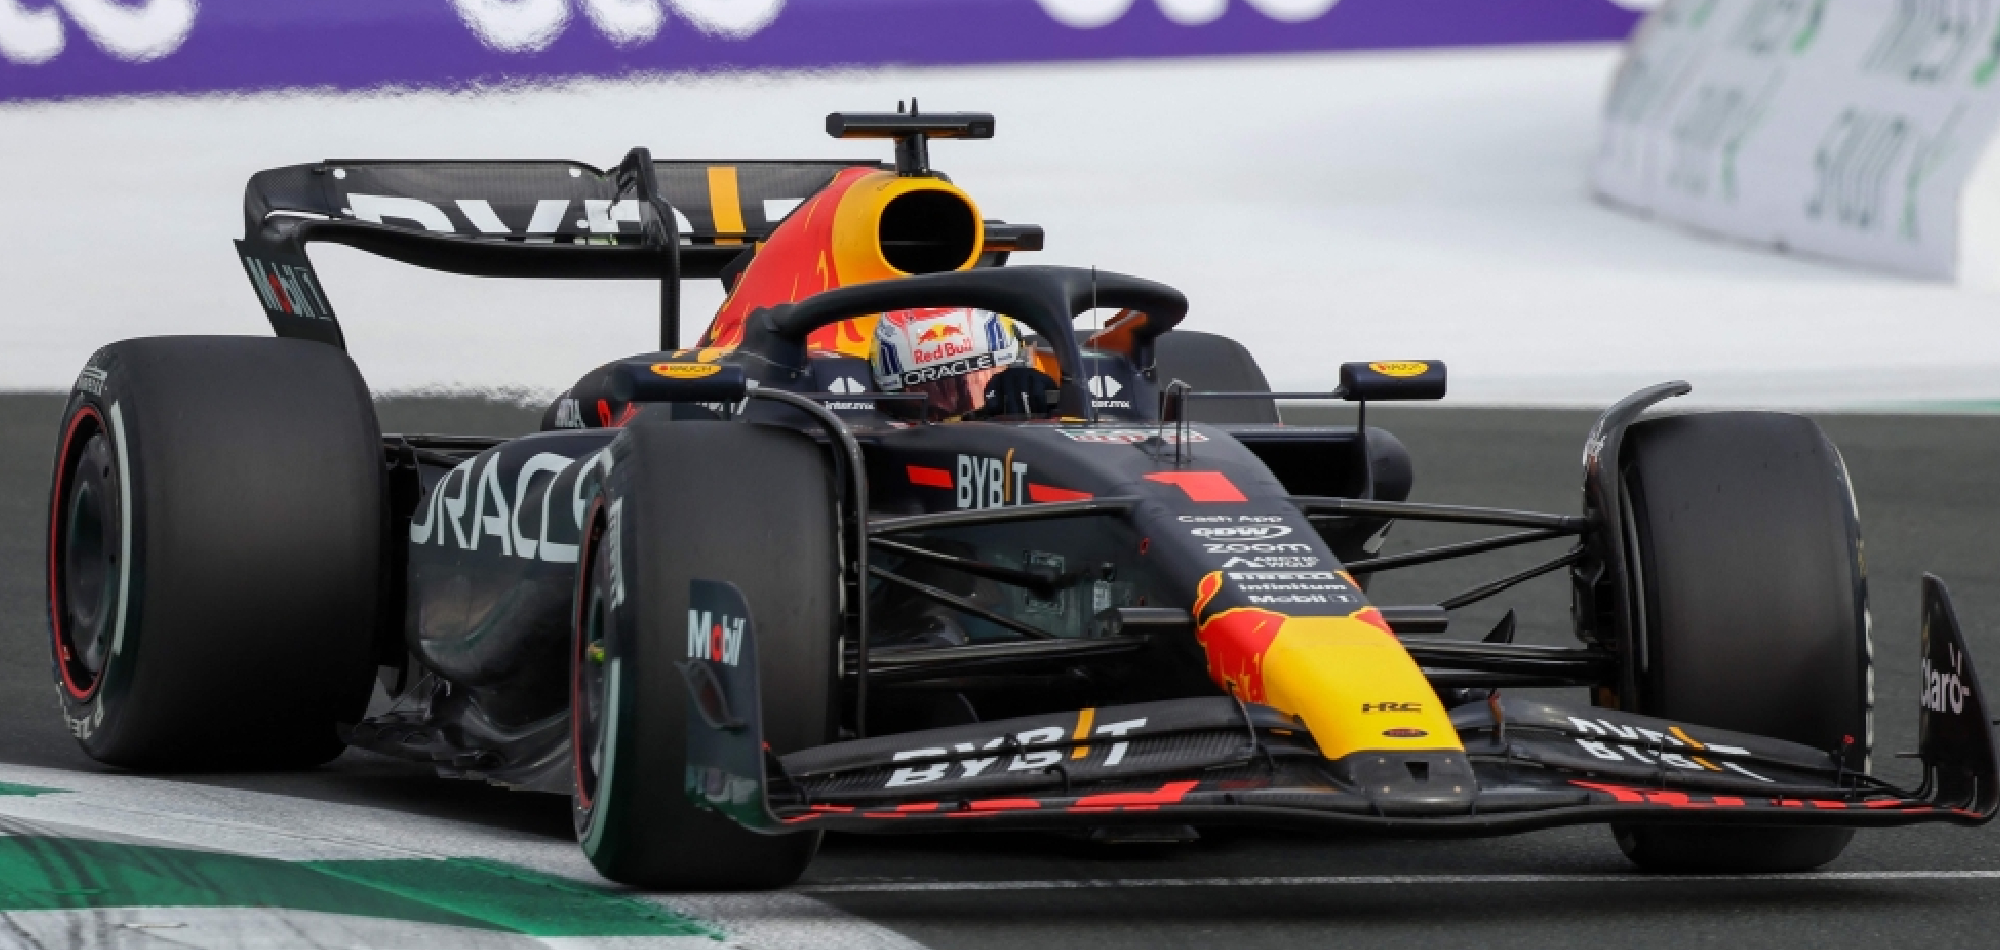 Dominant Verstappen completes practice clean sweep ahead of qualifying